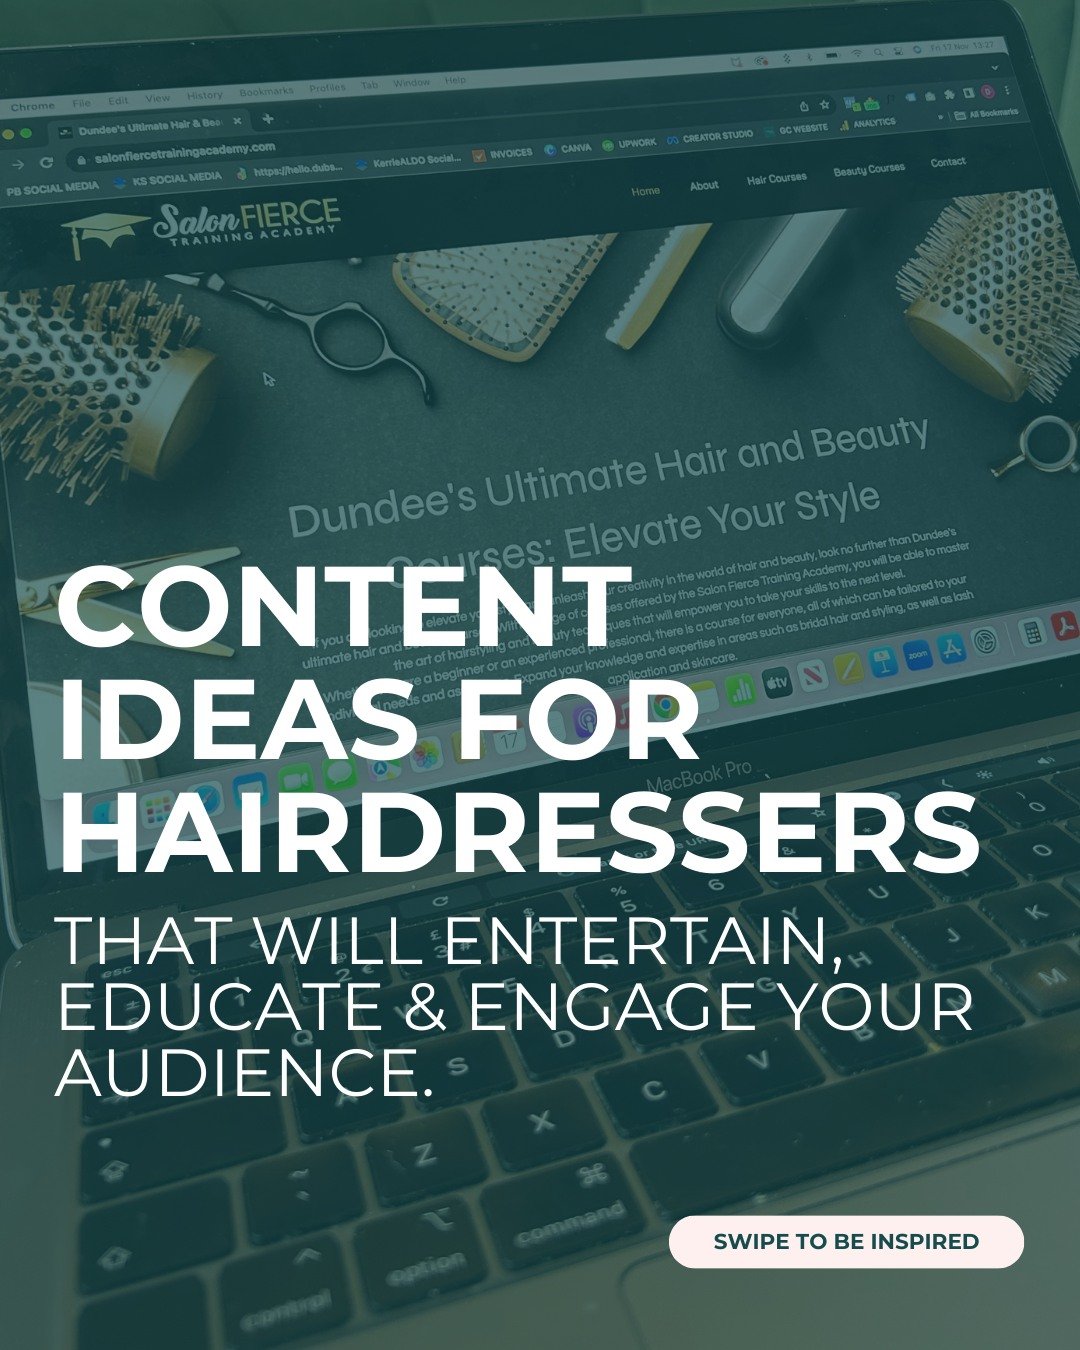 🔊 PSA: All hairdressers&hellip;

Swipe to see ideas on for content on how you can educate, entertain and engage with your audience.

When we were planning what type of examples to add into our new workshop &ldquo;How to create a content strategy&rdq